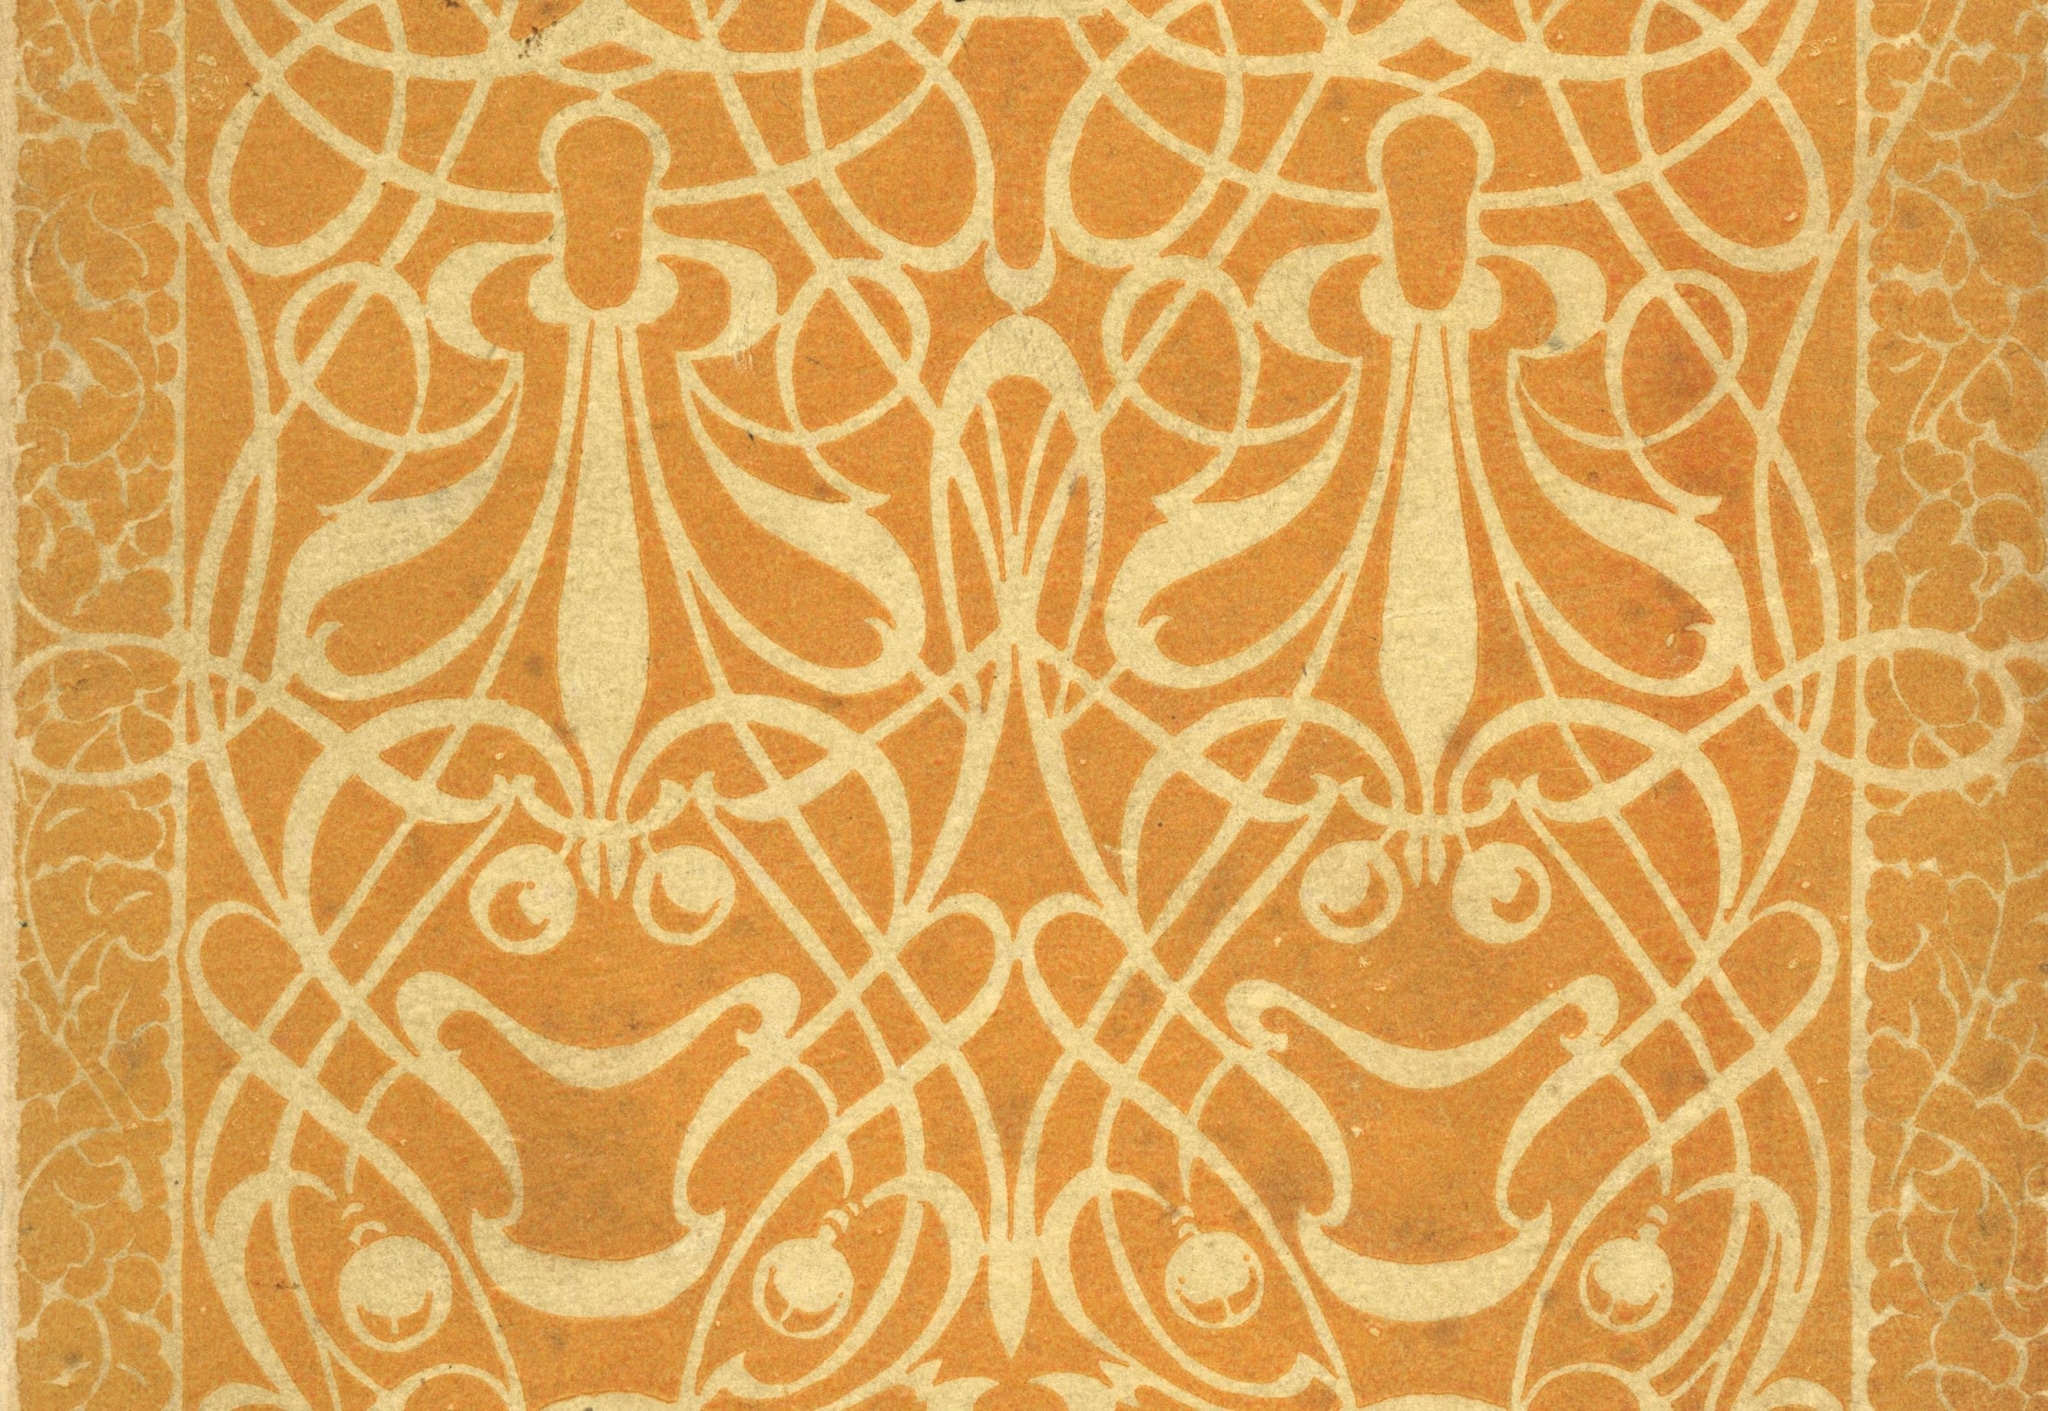 Pattern from cover of published book, The Yellow Wallpaper